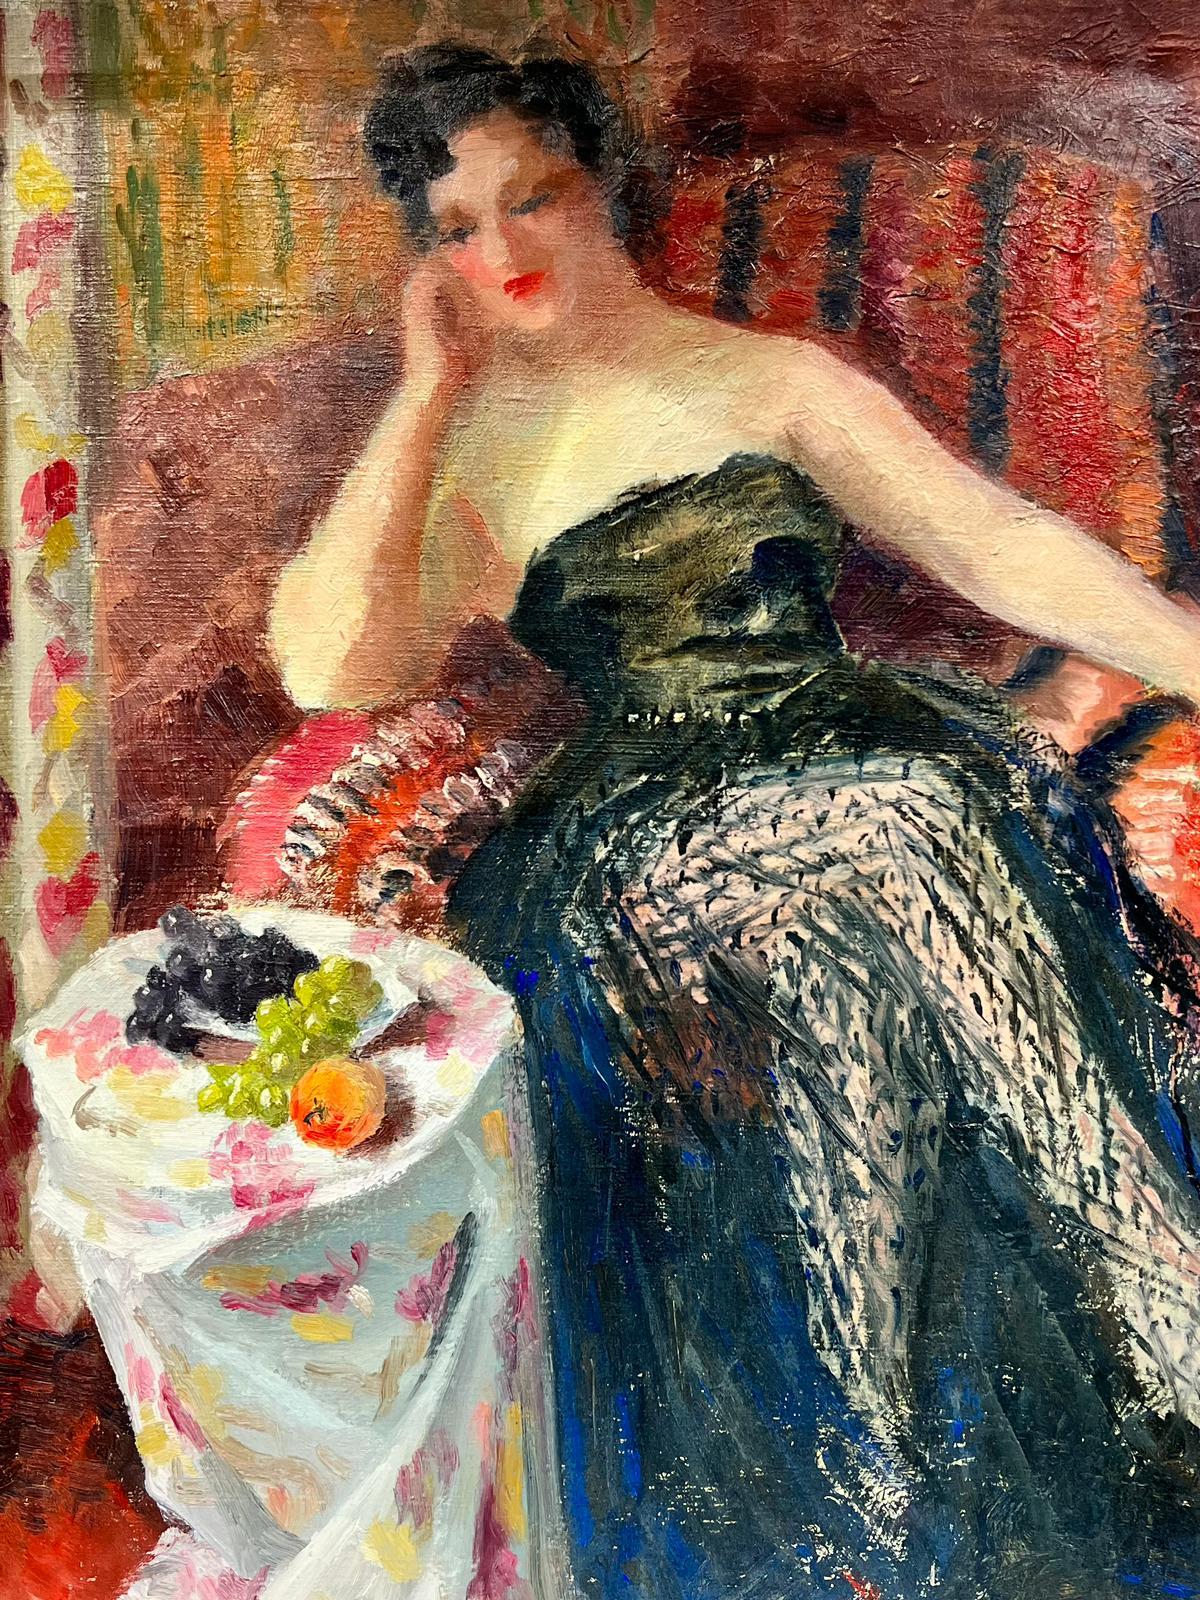 Elegant Lady in Interior next to a Bowl of Fruit
by Josine Vignon (French 1922-2022) 
signed and stamped verso
oil painting on canvas, unframed
canvas: 26 x 21 inches
very good condition 
provenance: from the artists estate, France

Josine Vignon